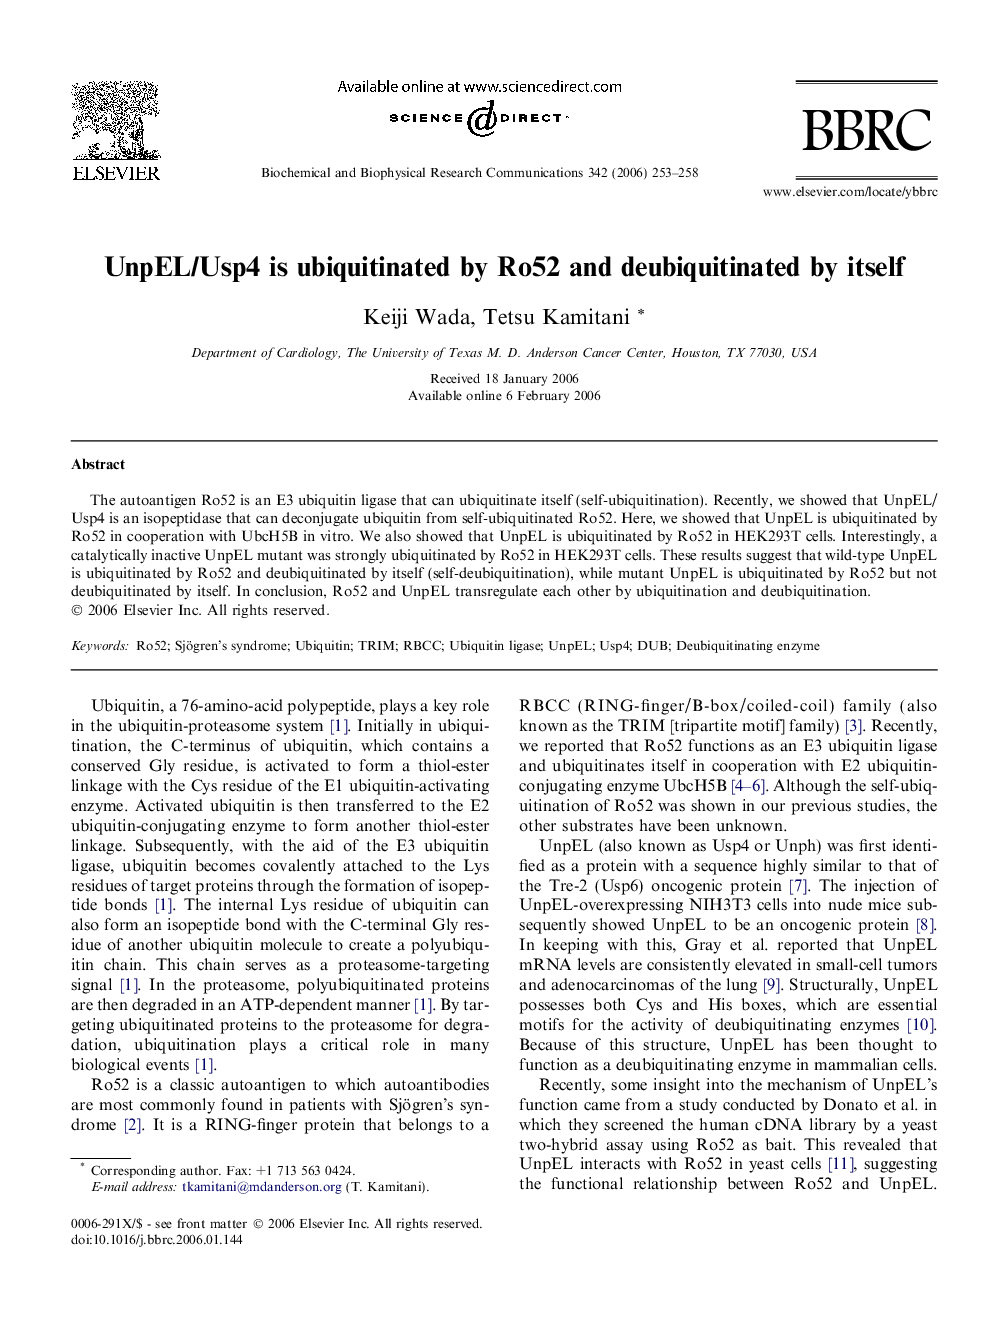 UnpEL/Usp4 is ubiquitinated by Ro52 and deubiquitinated by itself